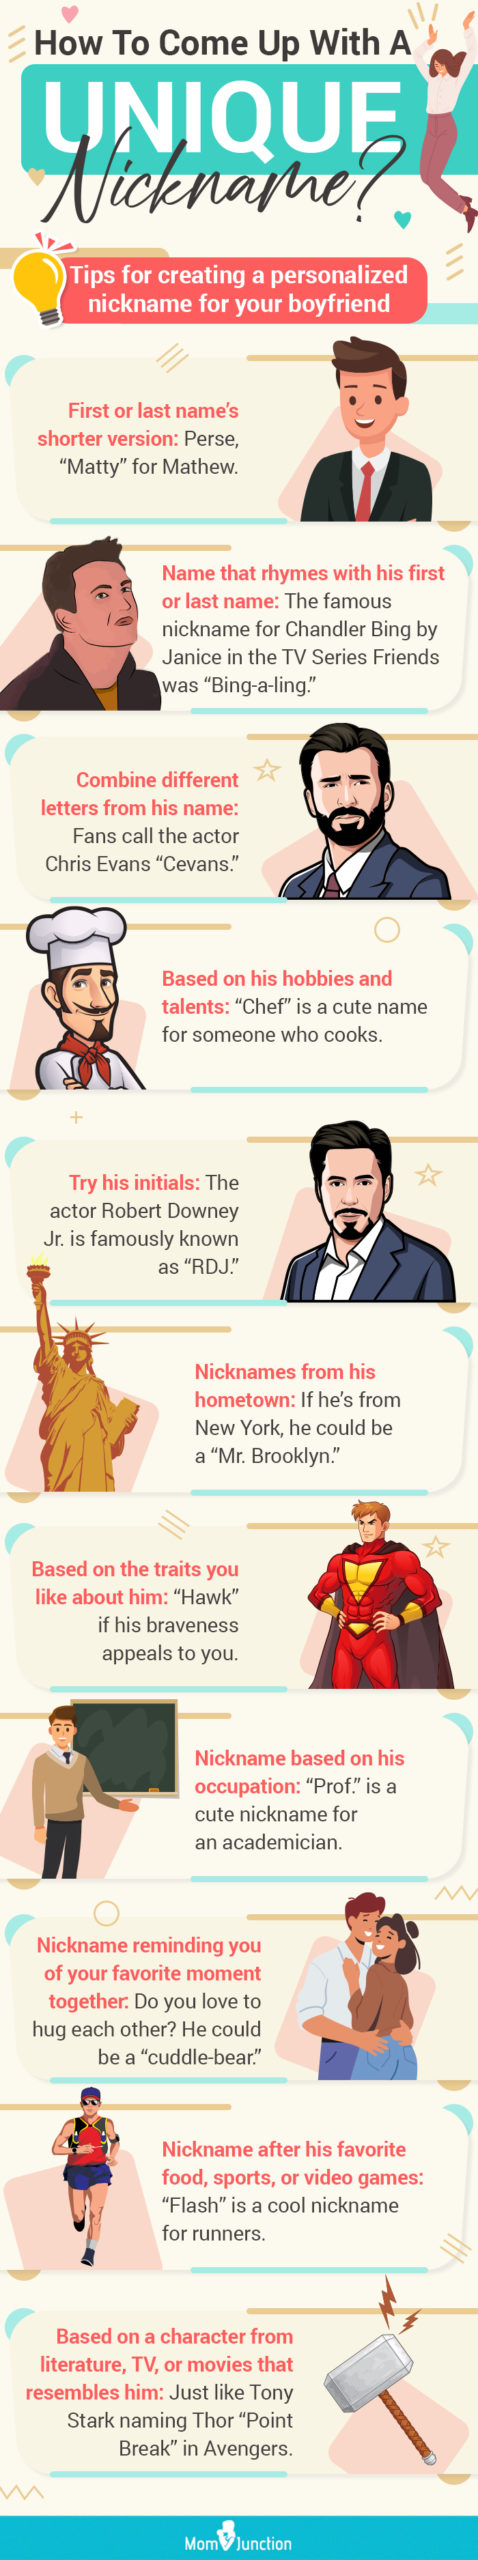 how to come up with a unique nickname [infographic]